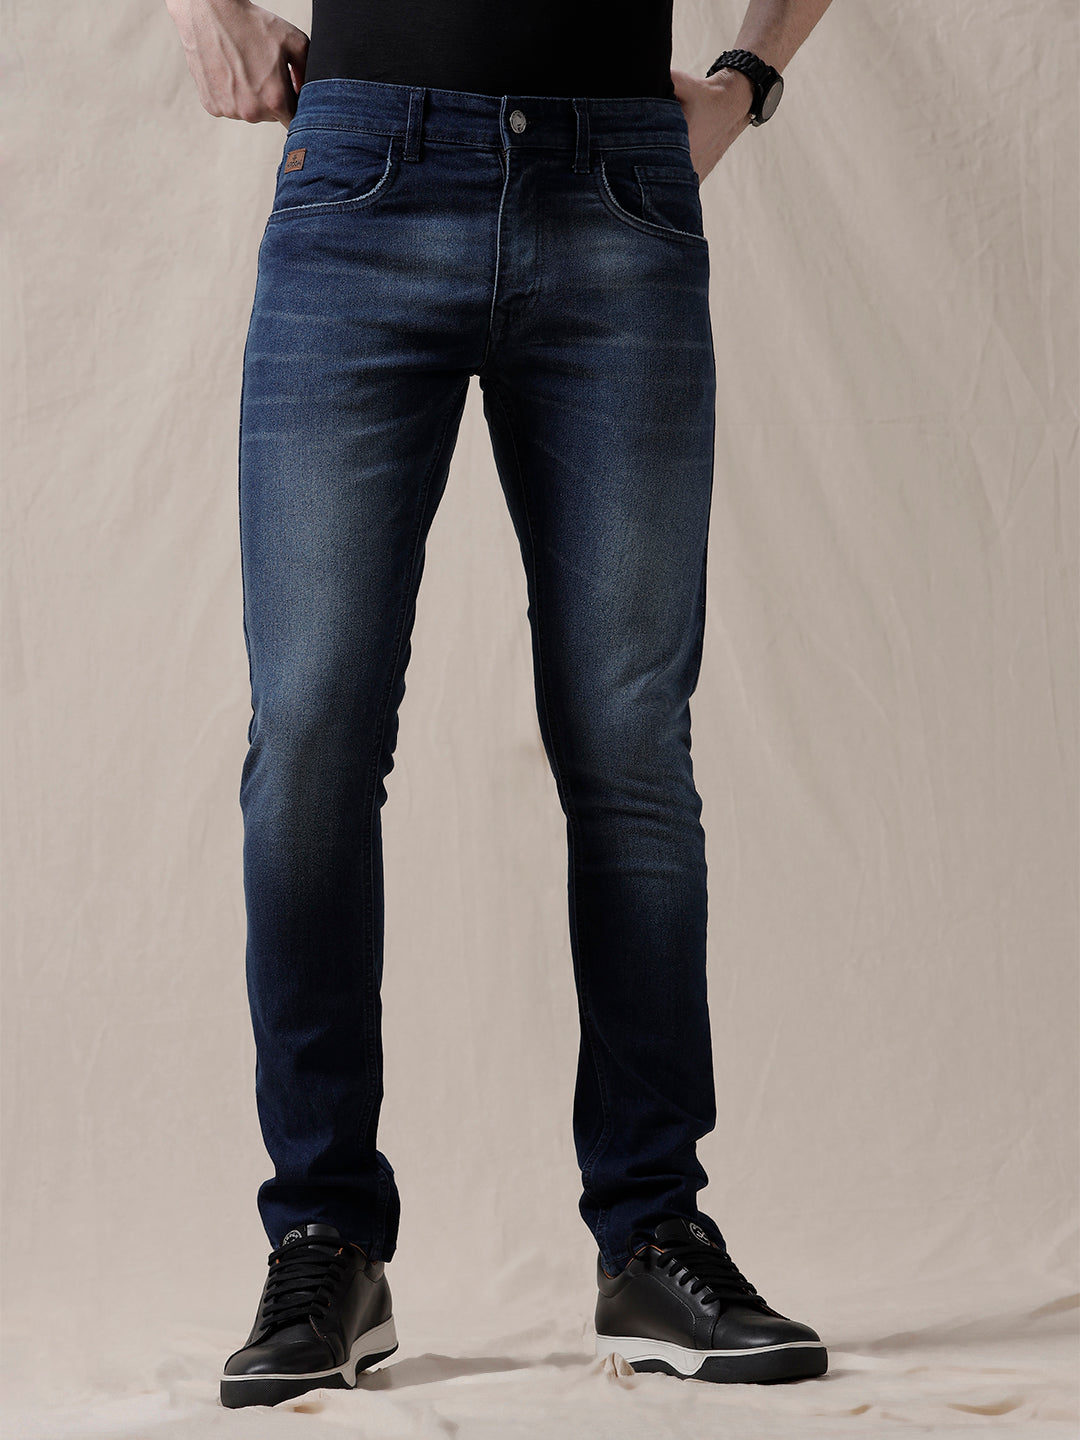 Blue Faded Chic Slim Fit Jeans